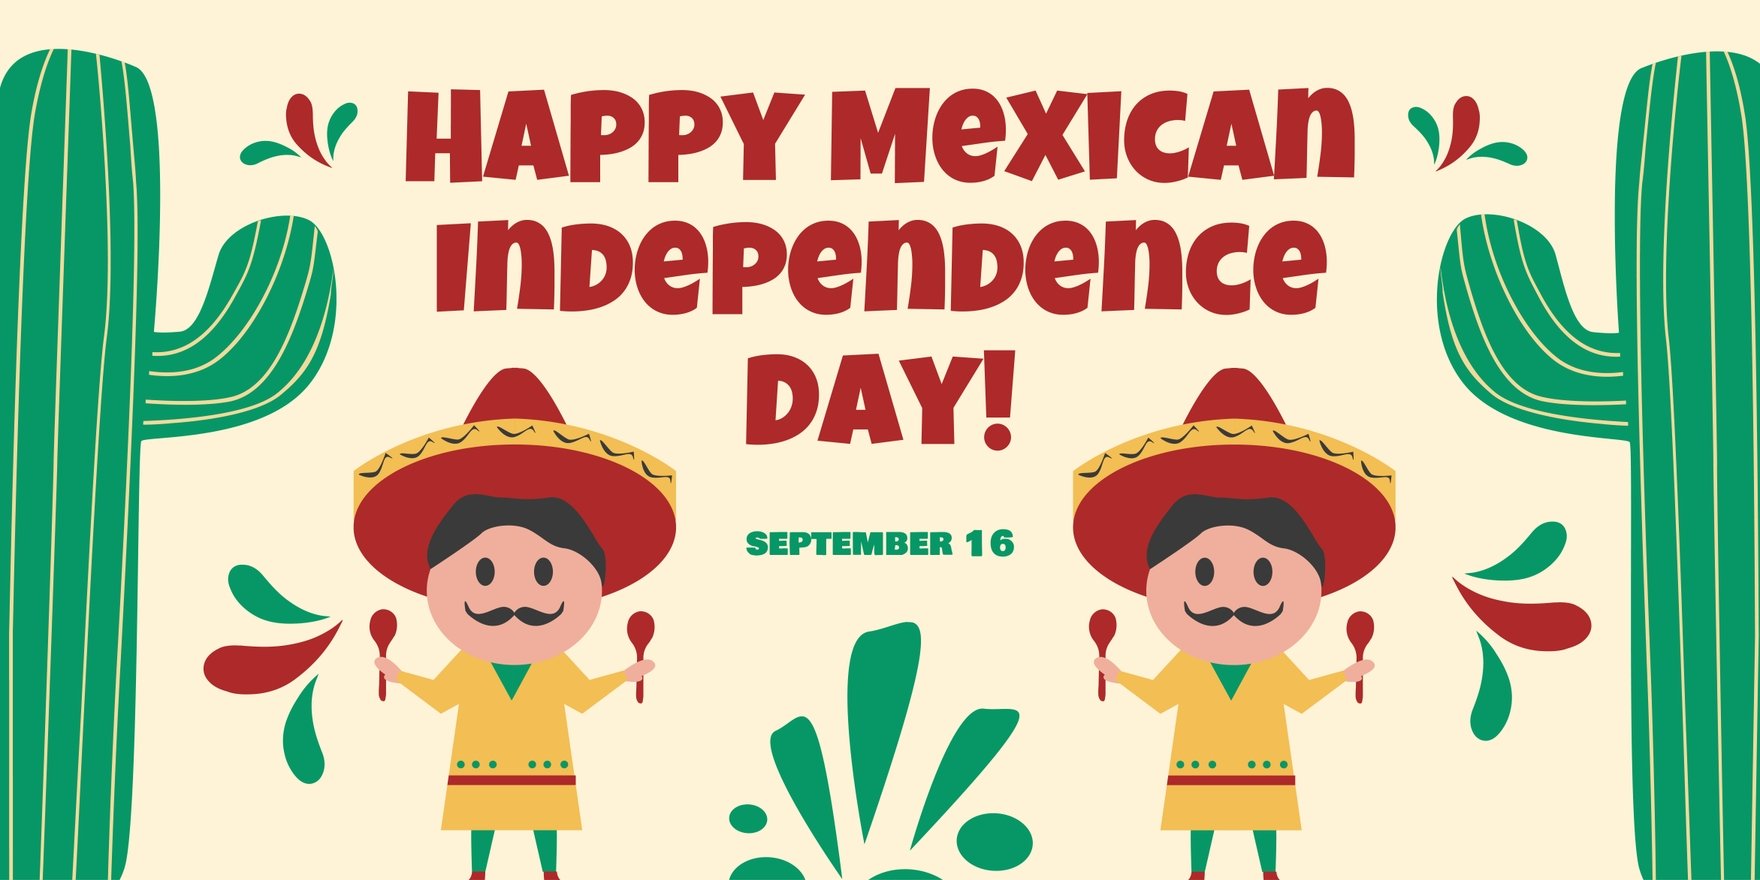 Cartoon Mexican Independence Day Banner - EPS, Illustrator, JPG, PSD, PNG,  SVG 